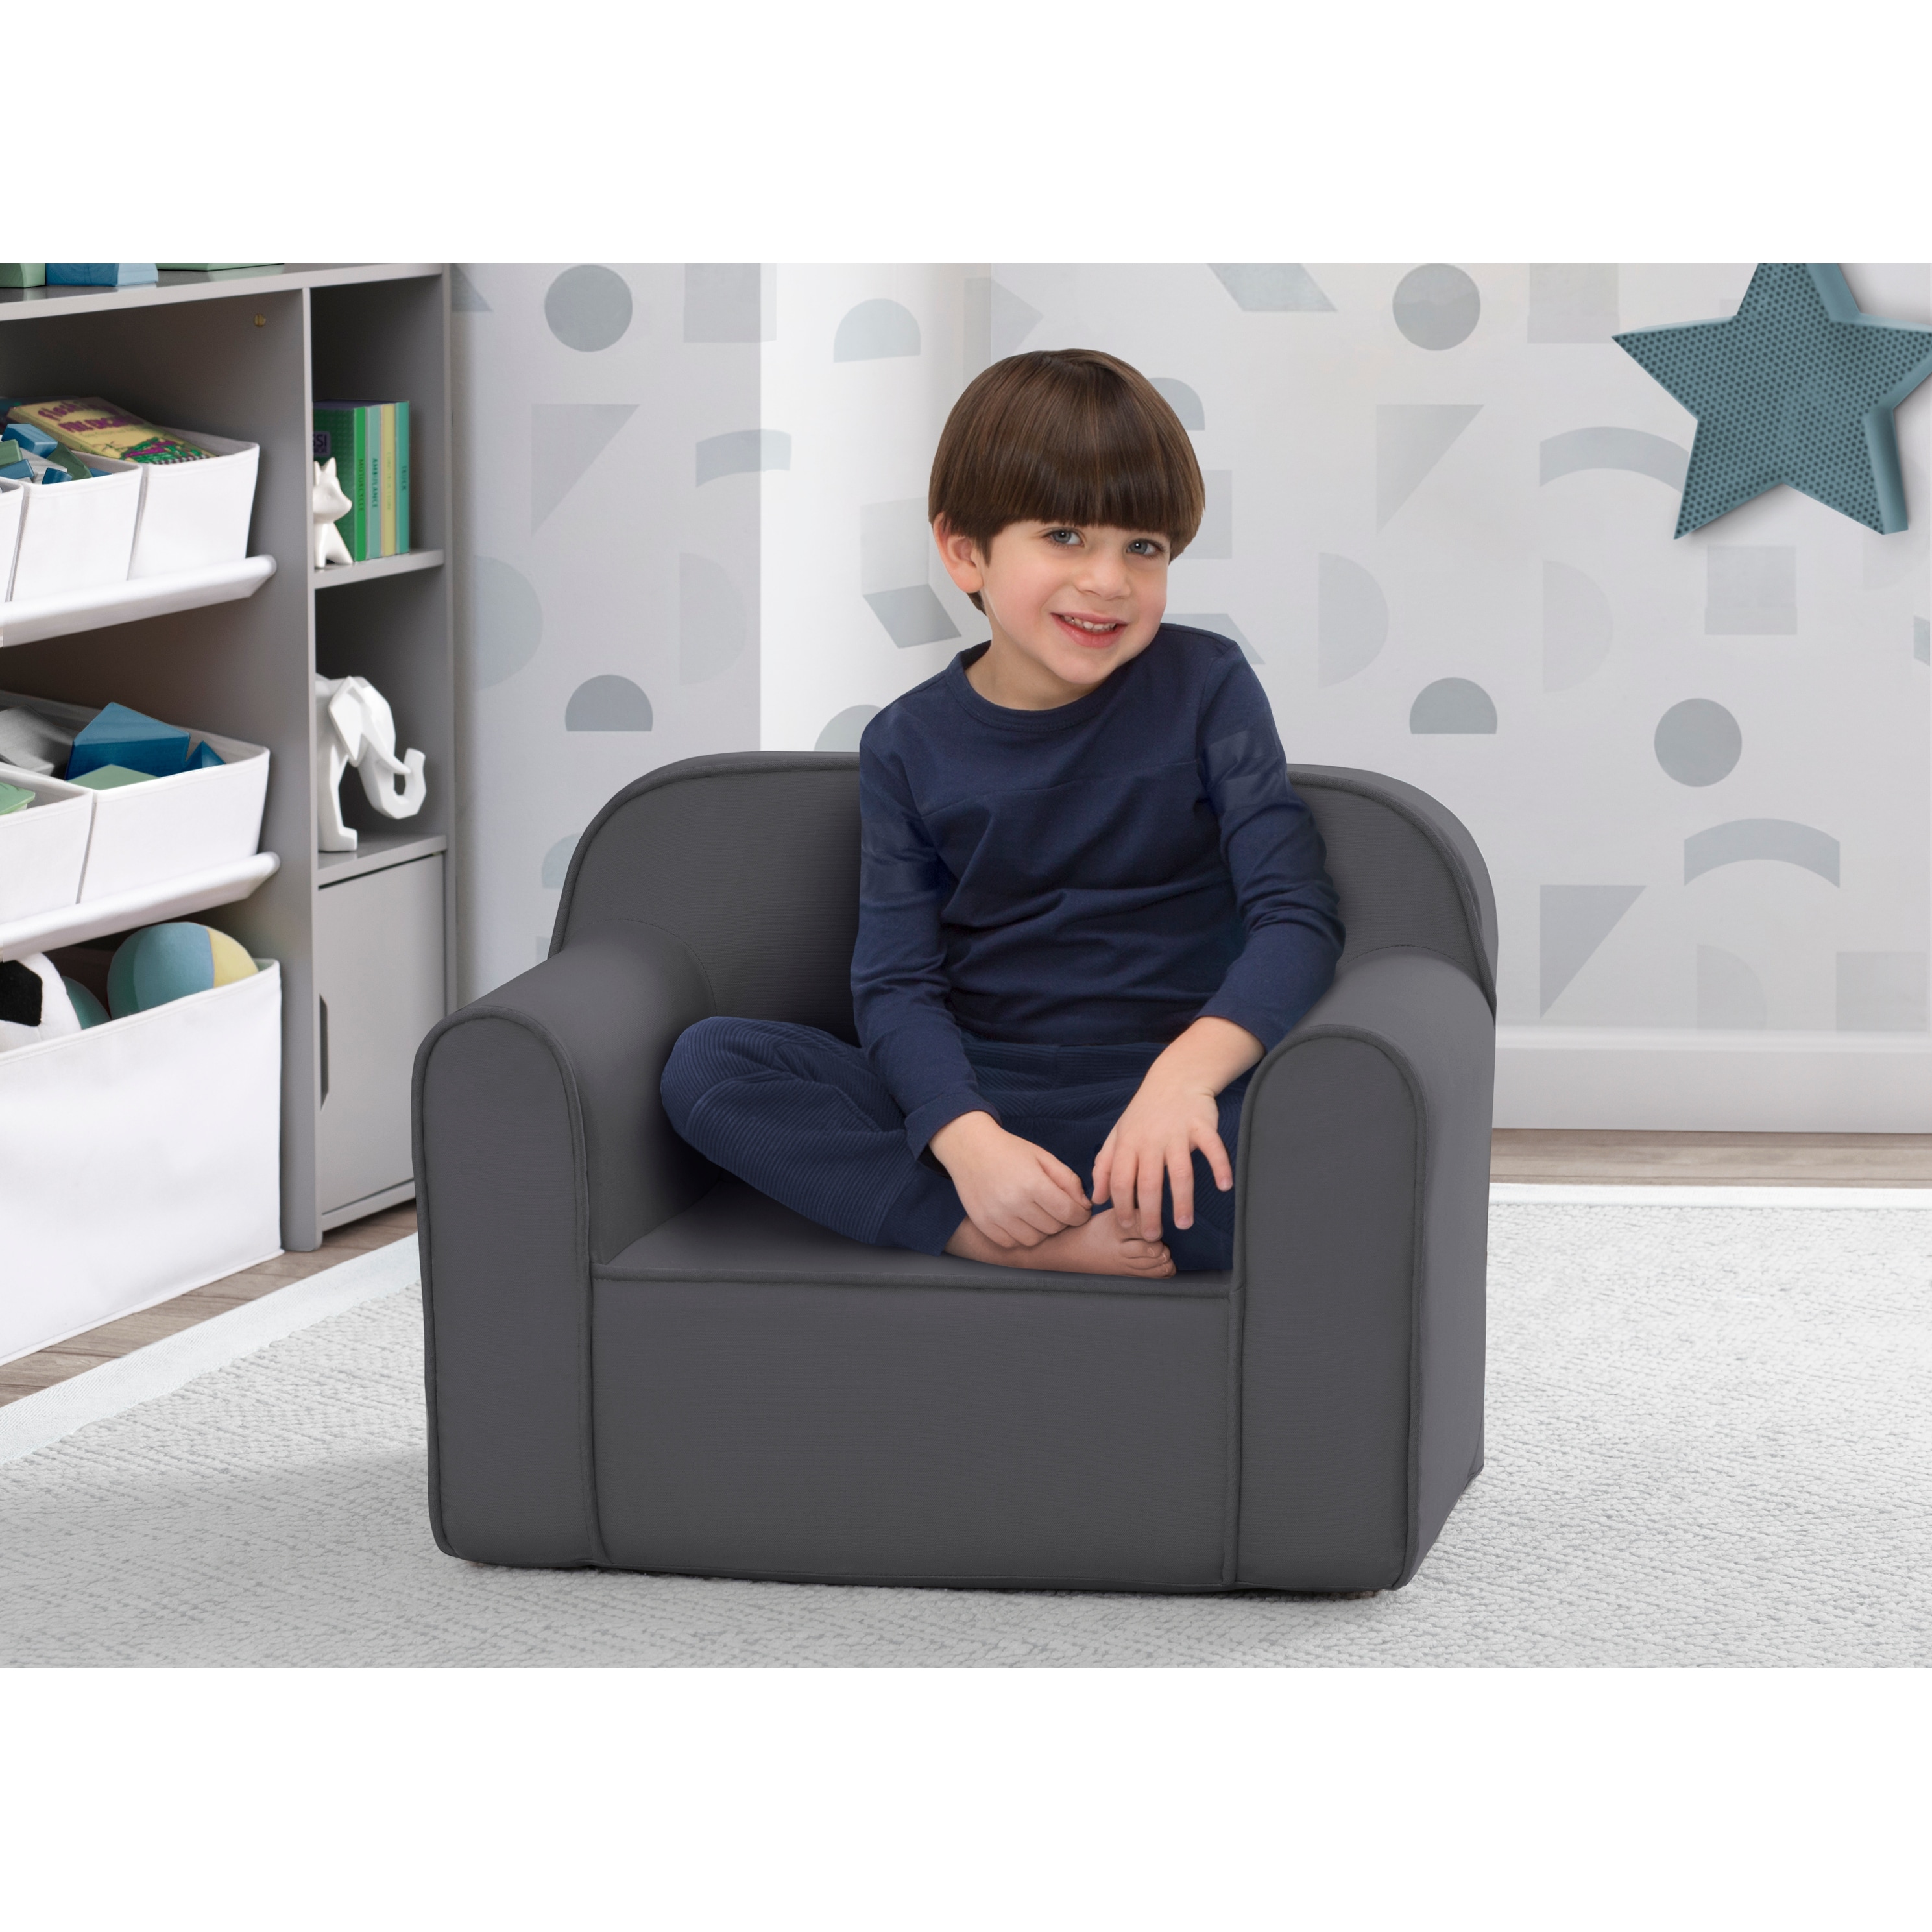 Serta iComfort Memory Foam Chair for Kids for Ages 18 Months and Up - Grey